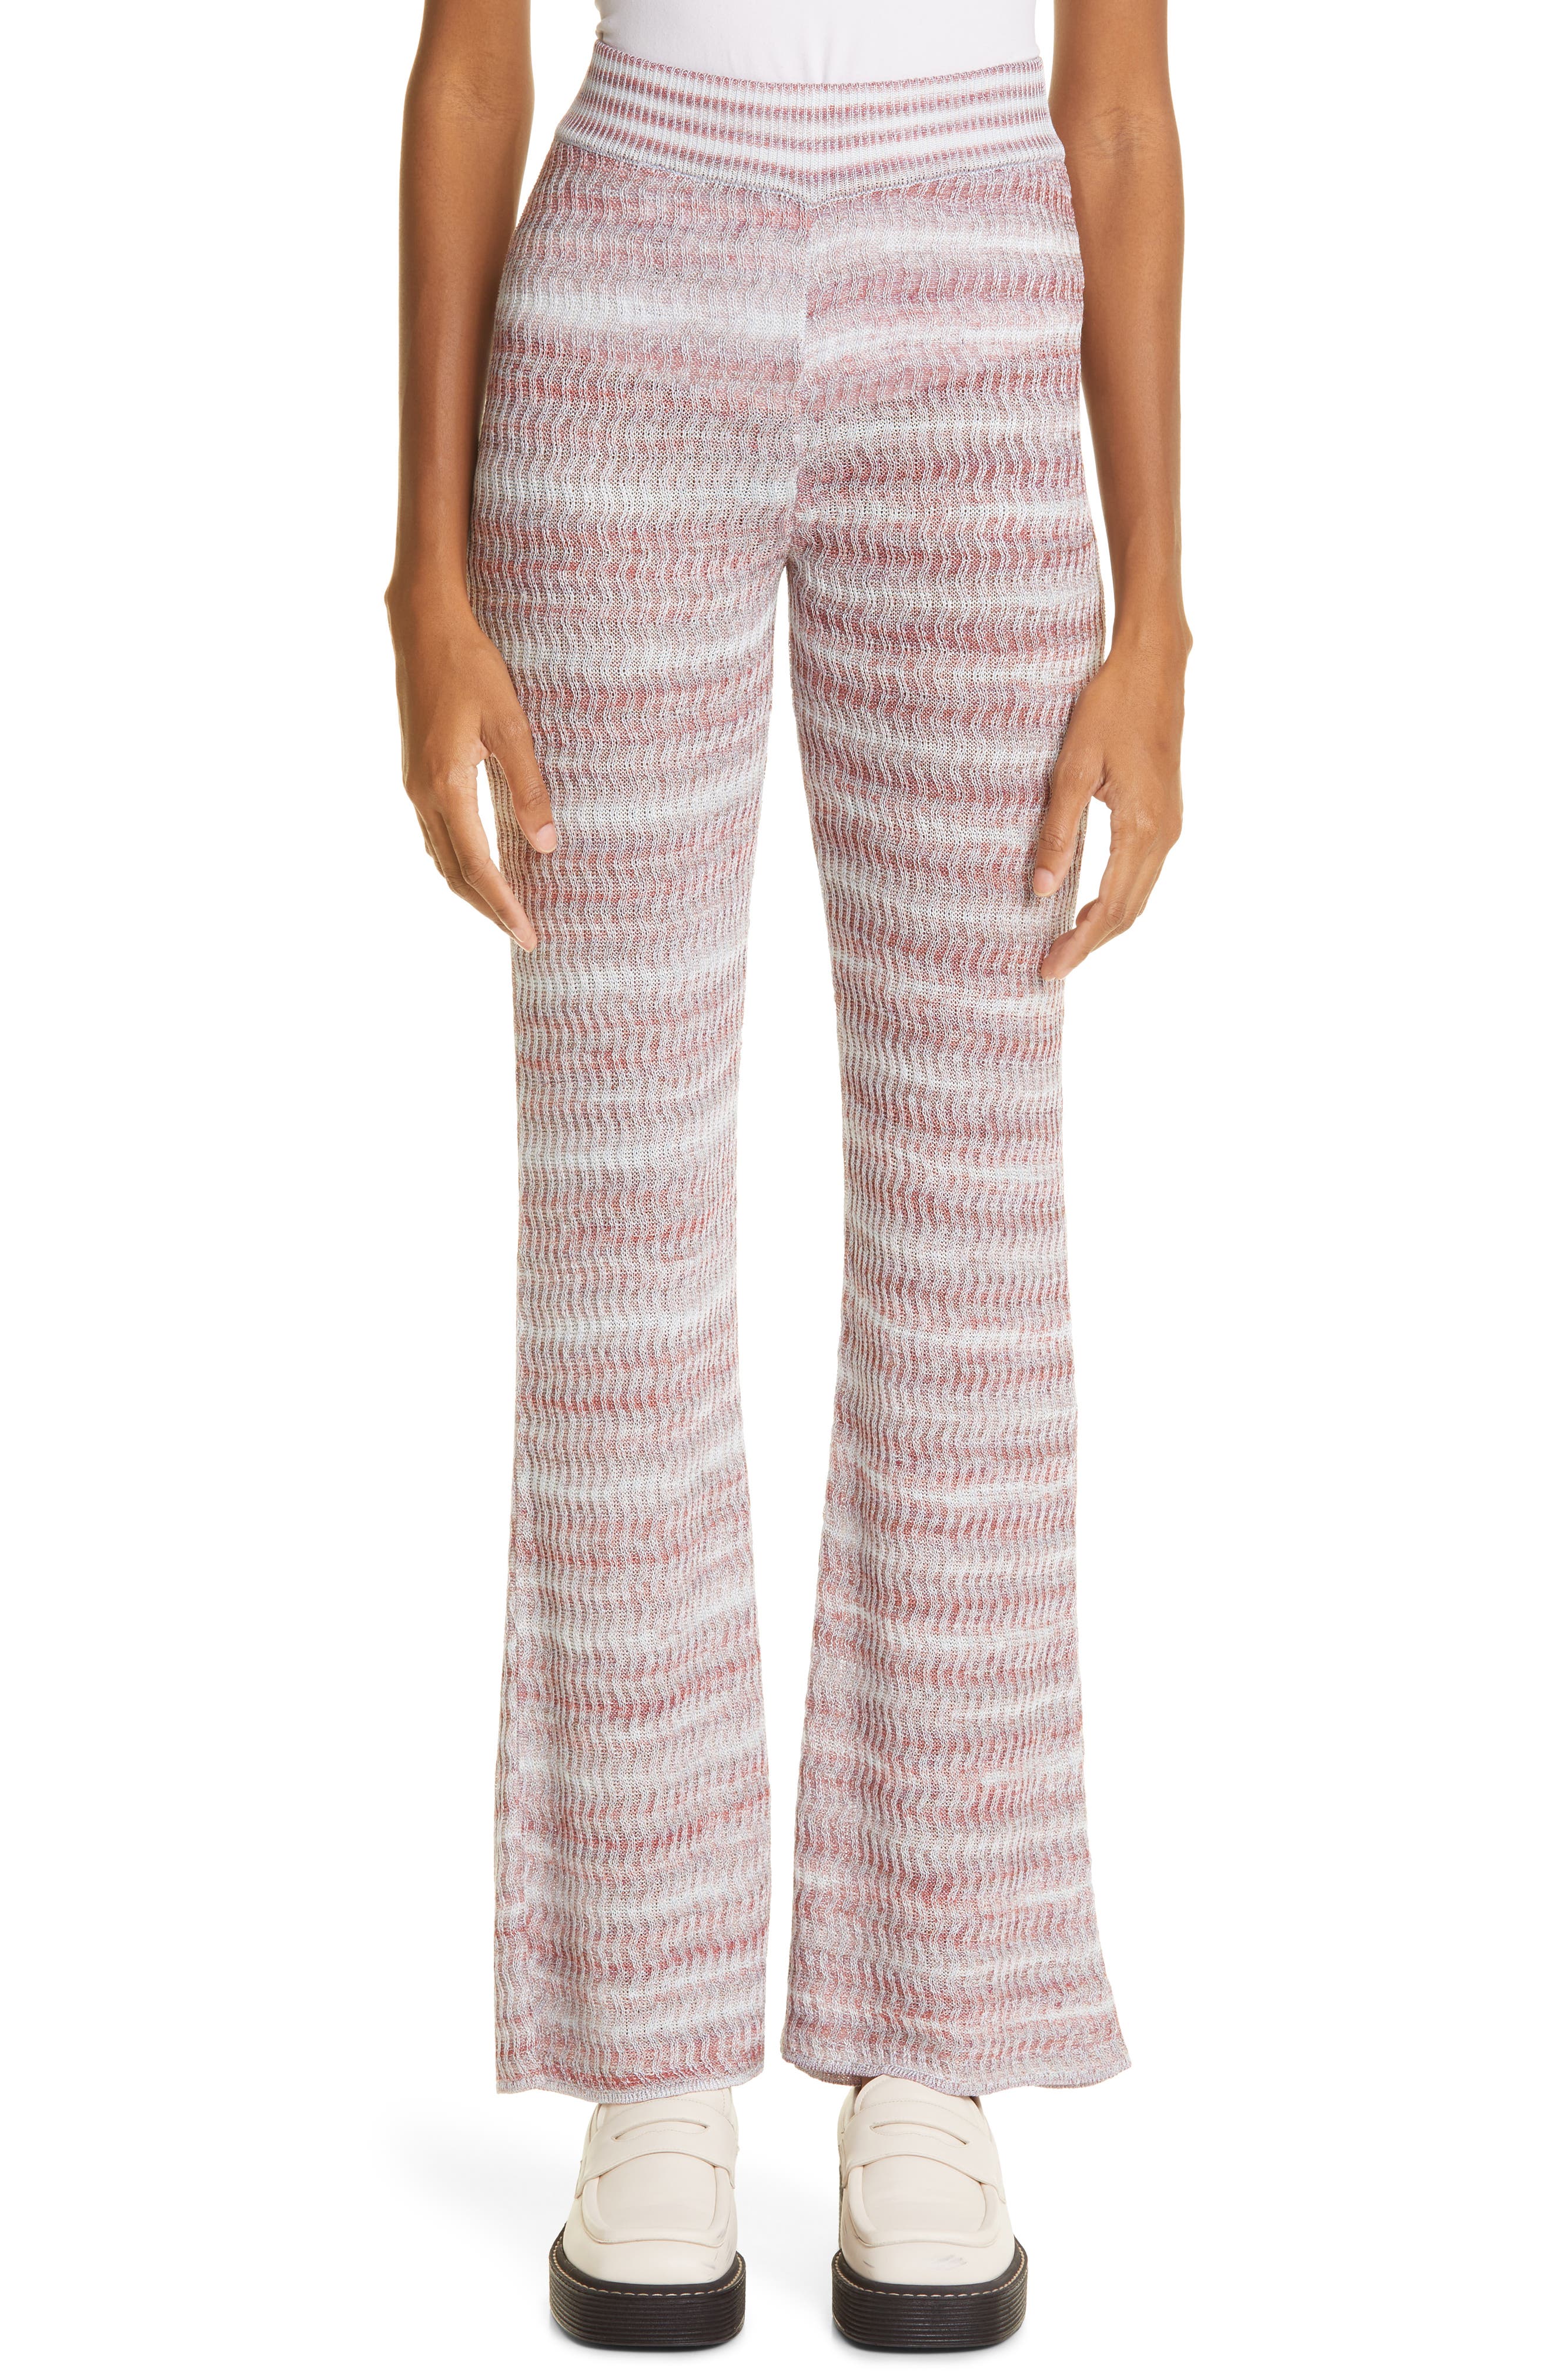 Eckhaus Latta Mirage Wave Knit Pull-On Pants in Oasis at Nordstrom